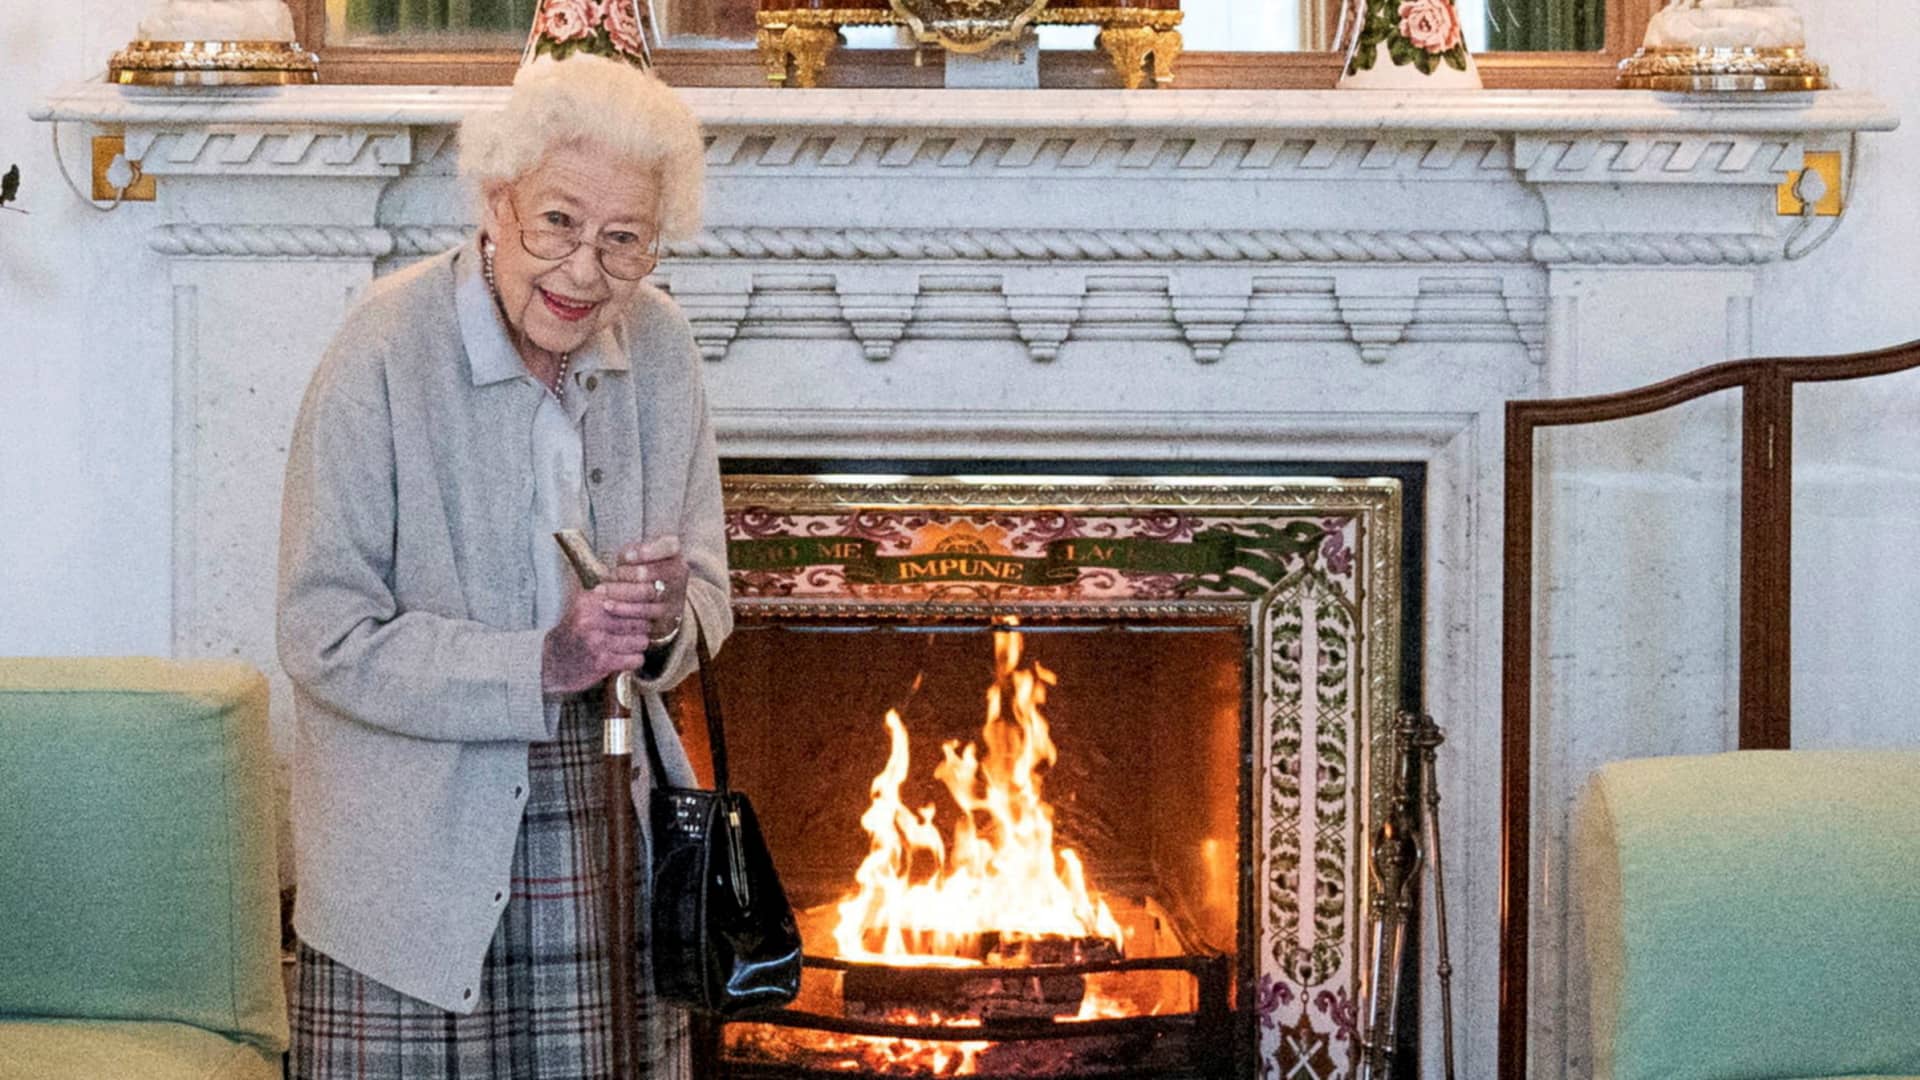 Britain's Queen Elizabeth waits in the Drawing Room before receiving Liz Truss for an audience, where she invited the newly elected leader of the Conservative party to become Prime Minister and form a new government, at Balmoral Castle, Scotland, Britain September 6, 2022. 